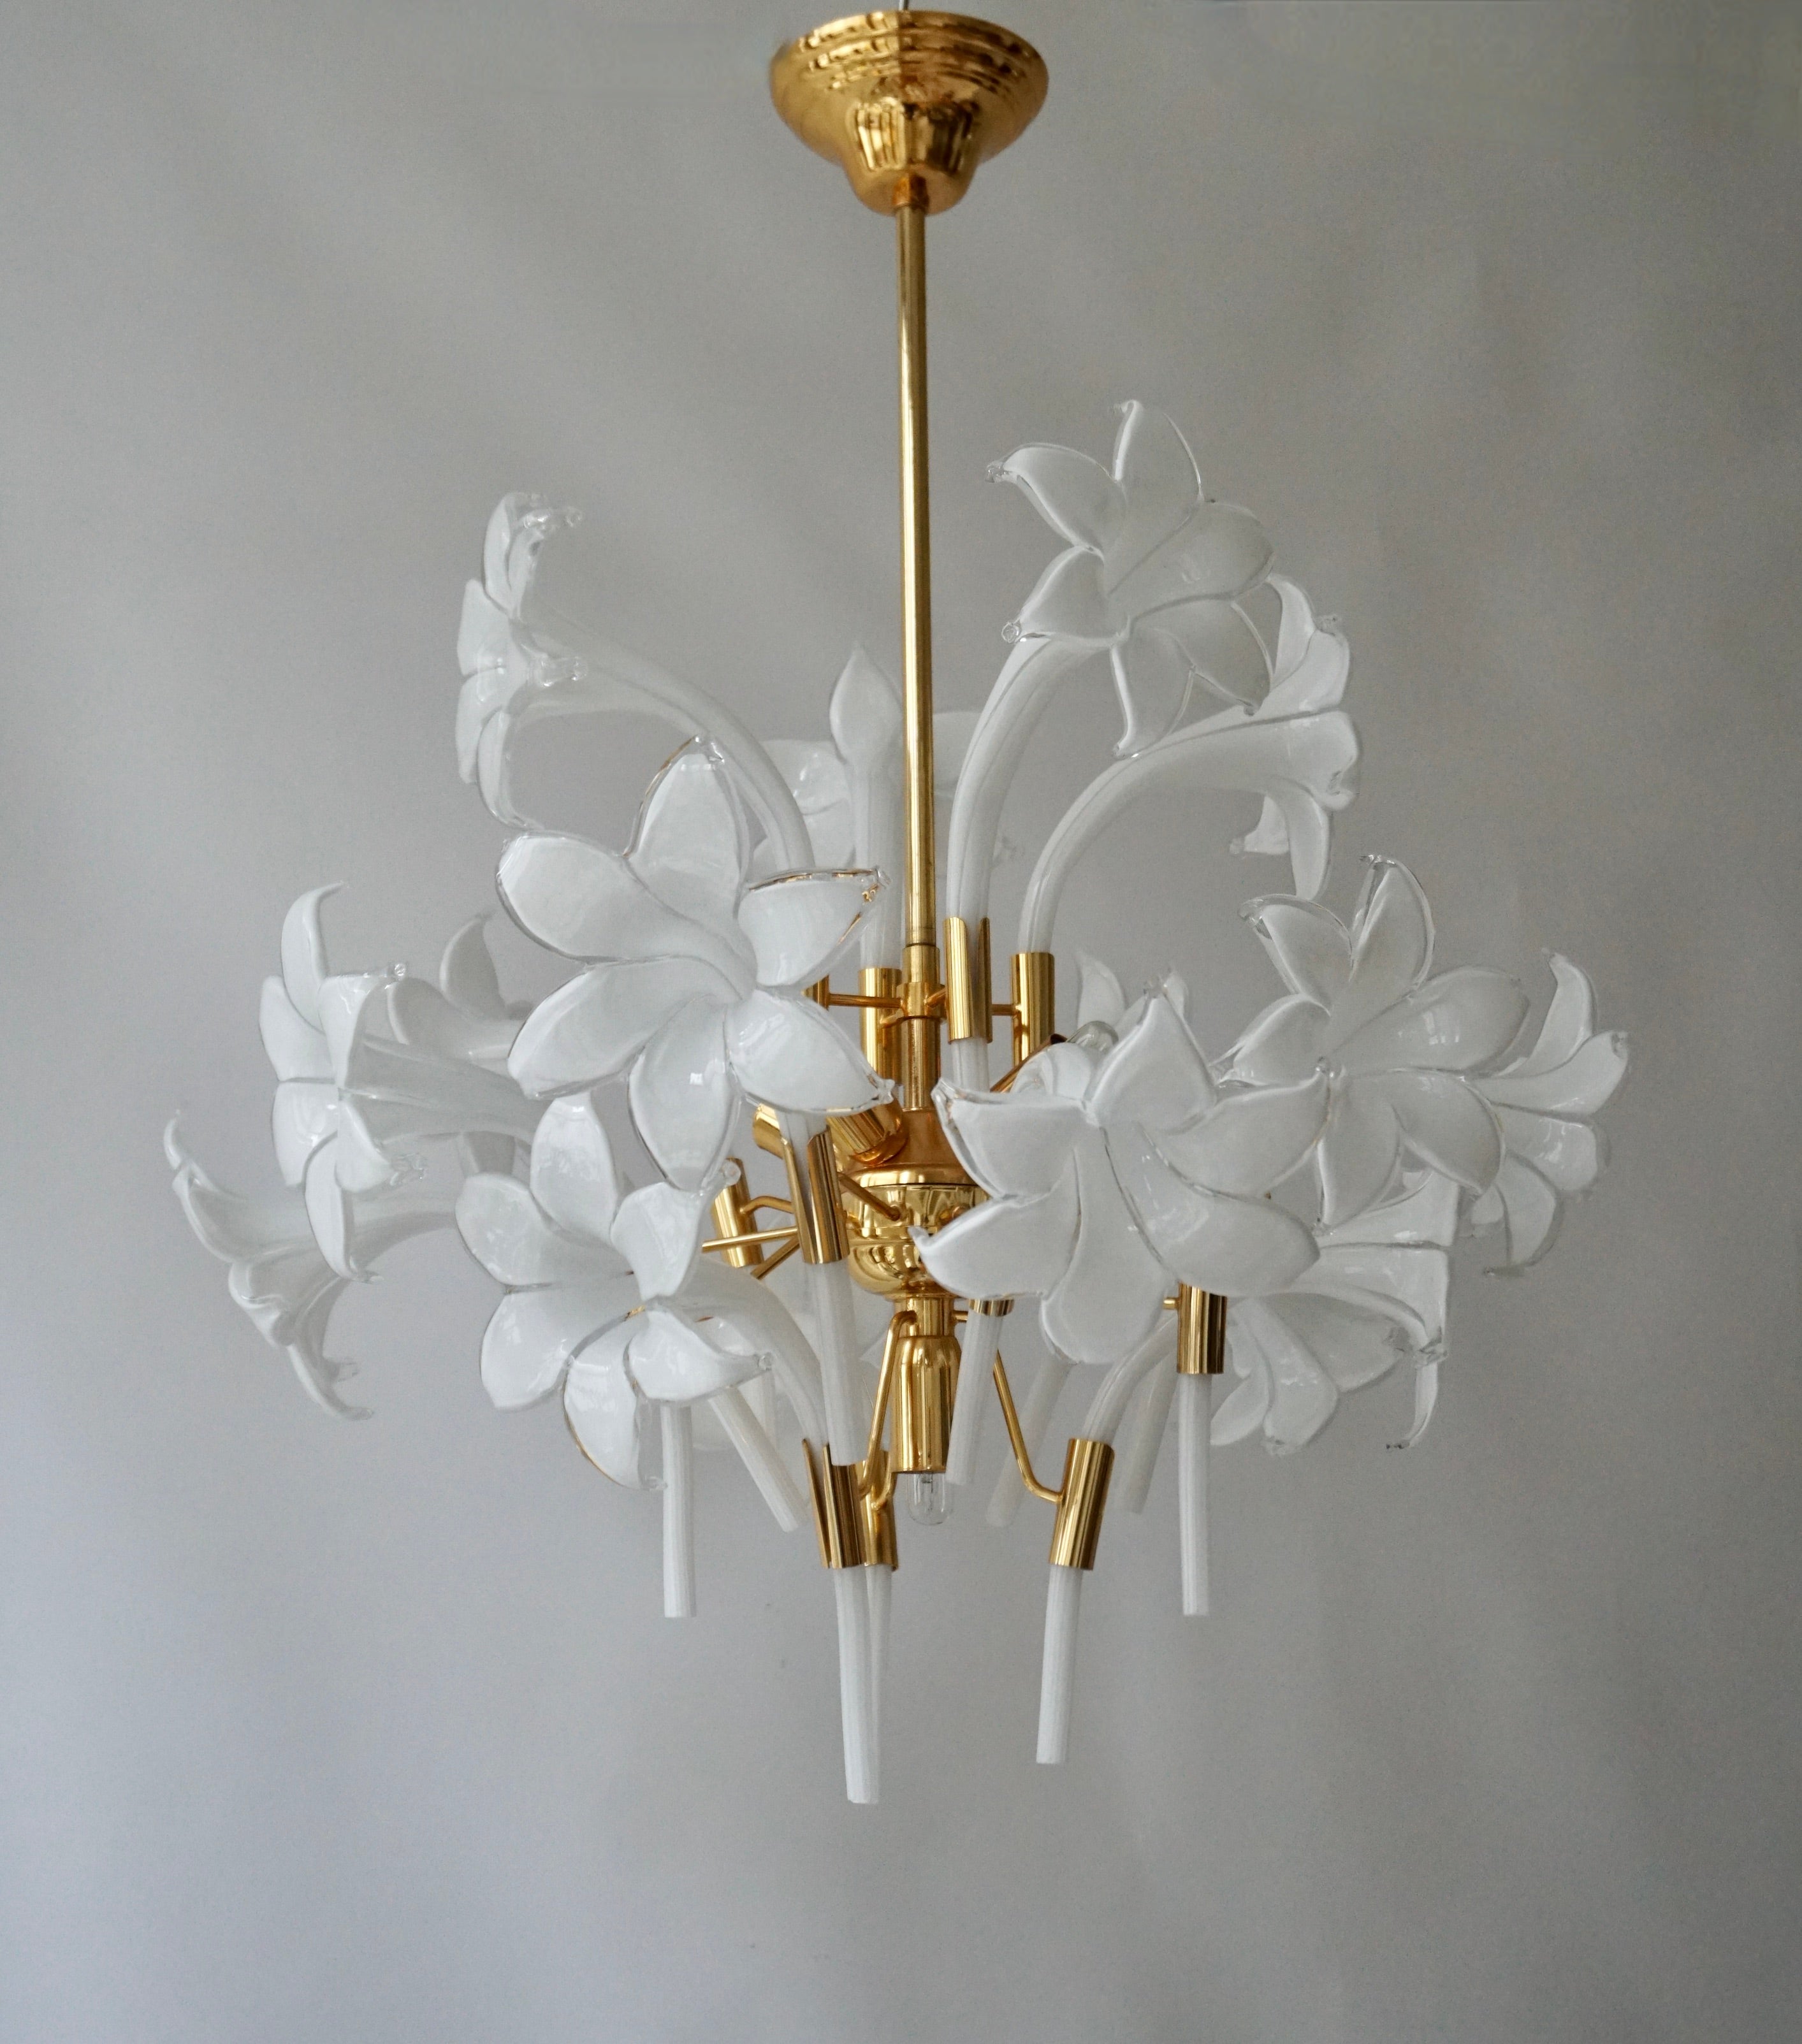 A beautiful Italian hanging lamp chandelier. 
The lamp is attributed to Franco Luce. The glass flowers and leaves are mouth-blown and hand-formed. 
The light consists of of a golden metal base with white flowers. 
 
Dimensions: Diameter 23.6